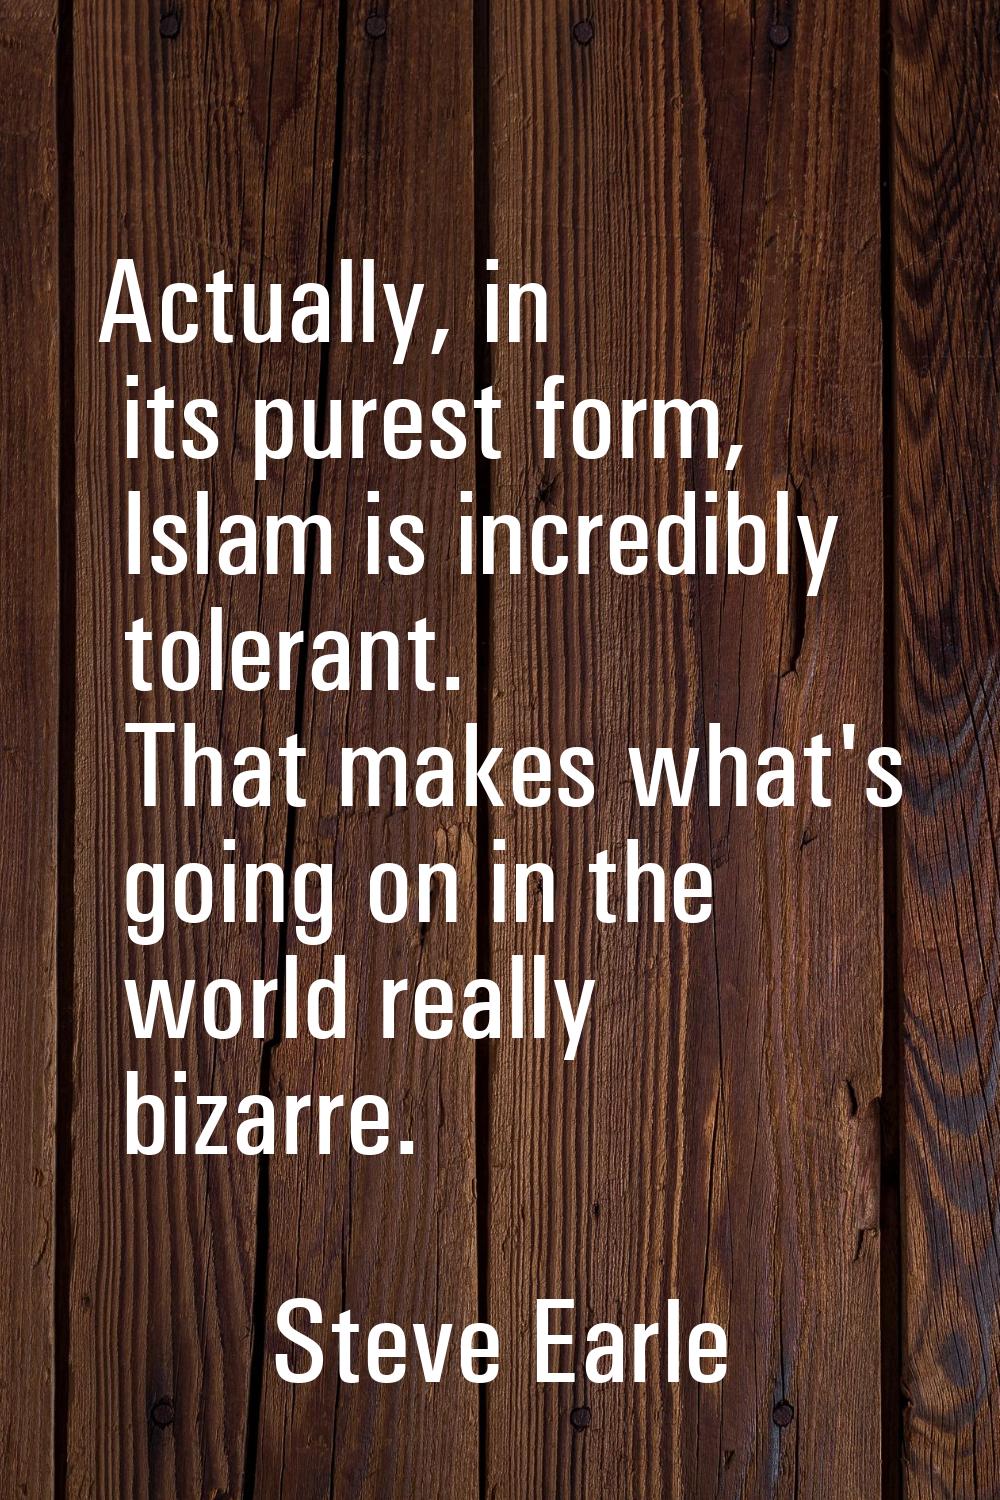 Actually, in its purest form, Islam is incredibly tolerant. That makes what's going on in the world